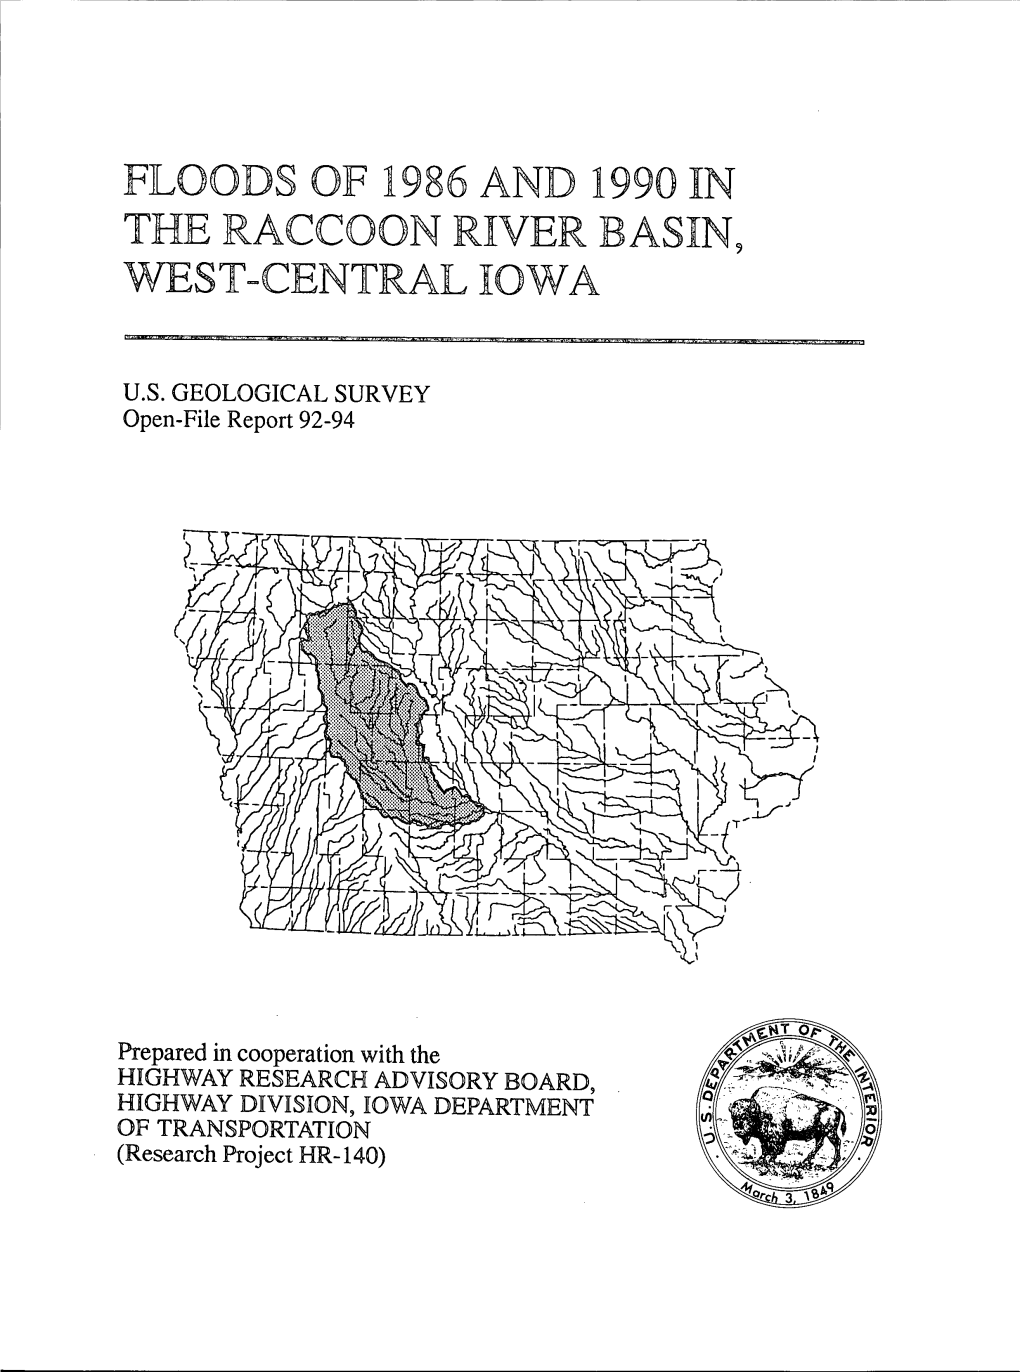 Floods of 1986 and 1990 in the Raccoon River Basin, West-Central Iowa